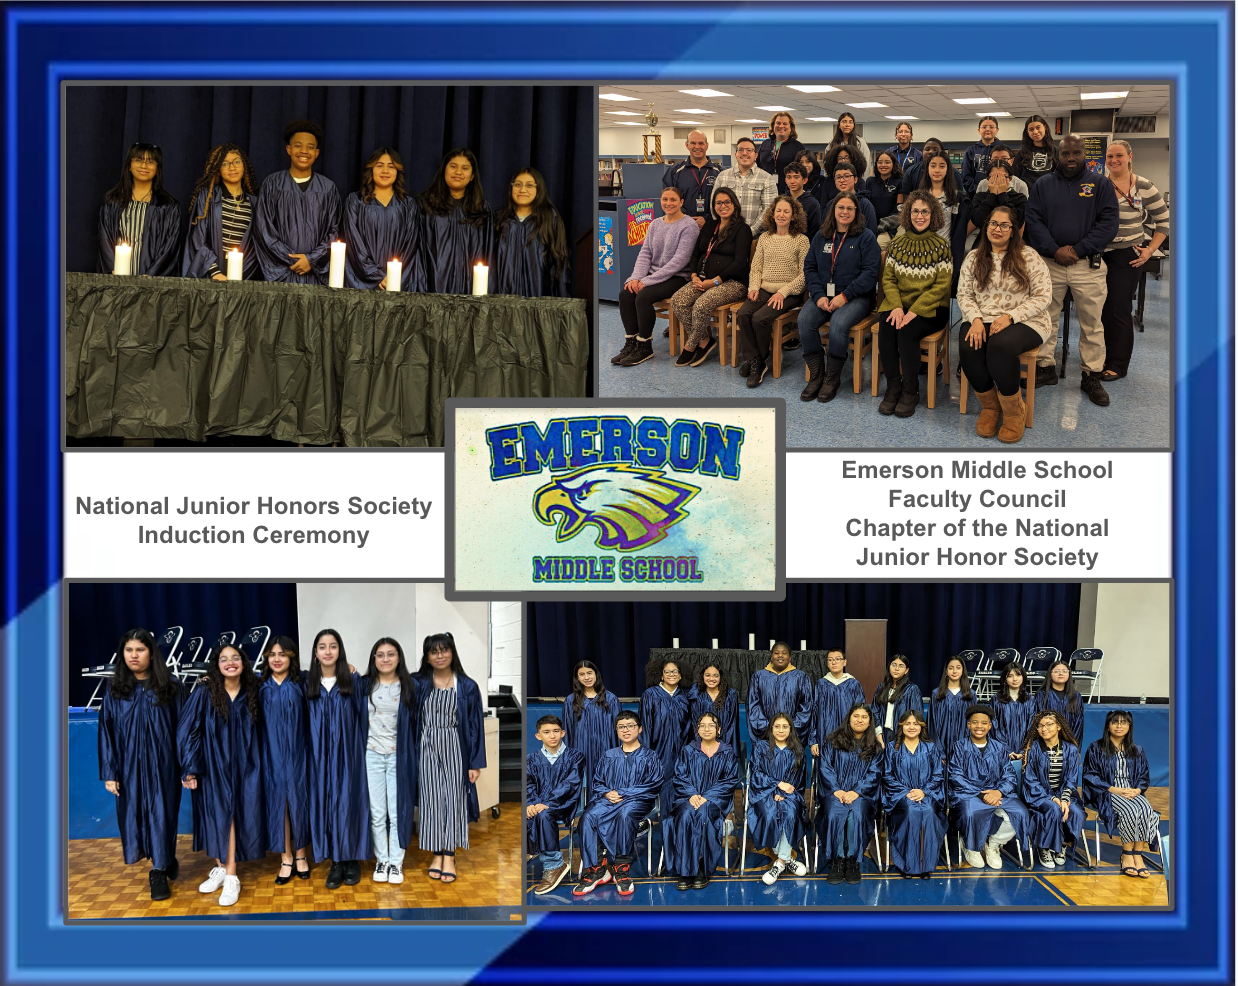 Induction into the National Junior Honor Society at the Emerson Middle School